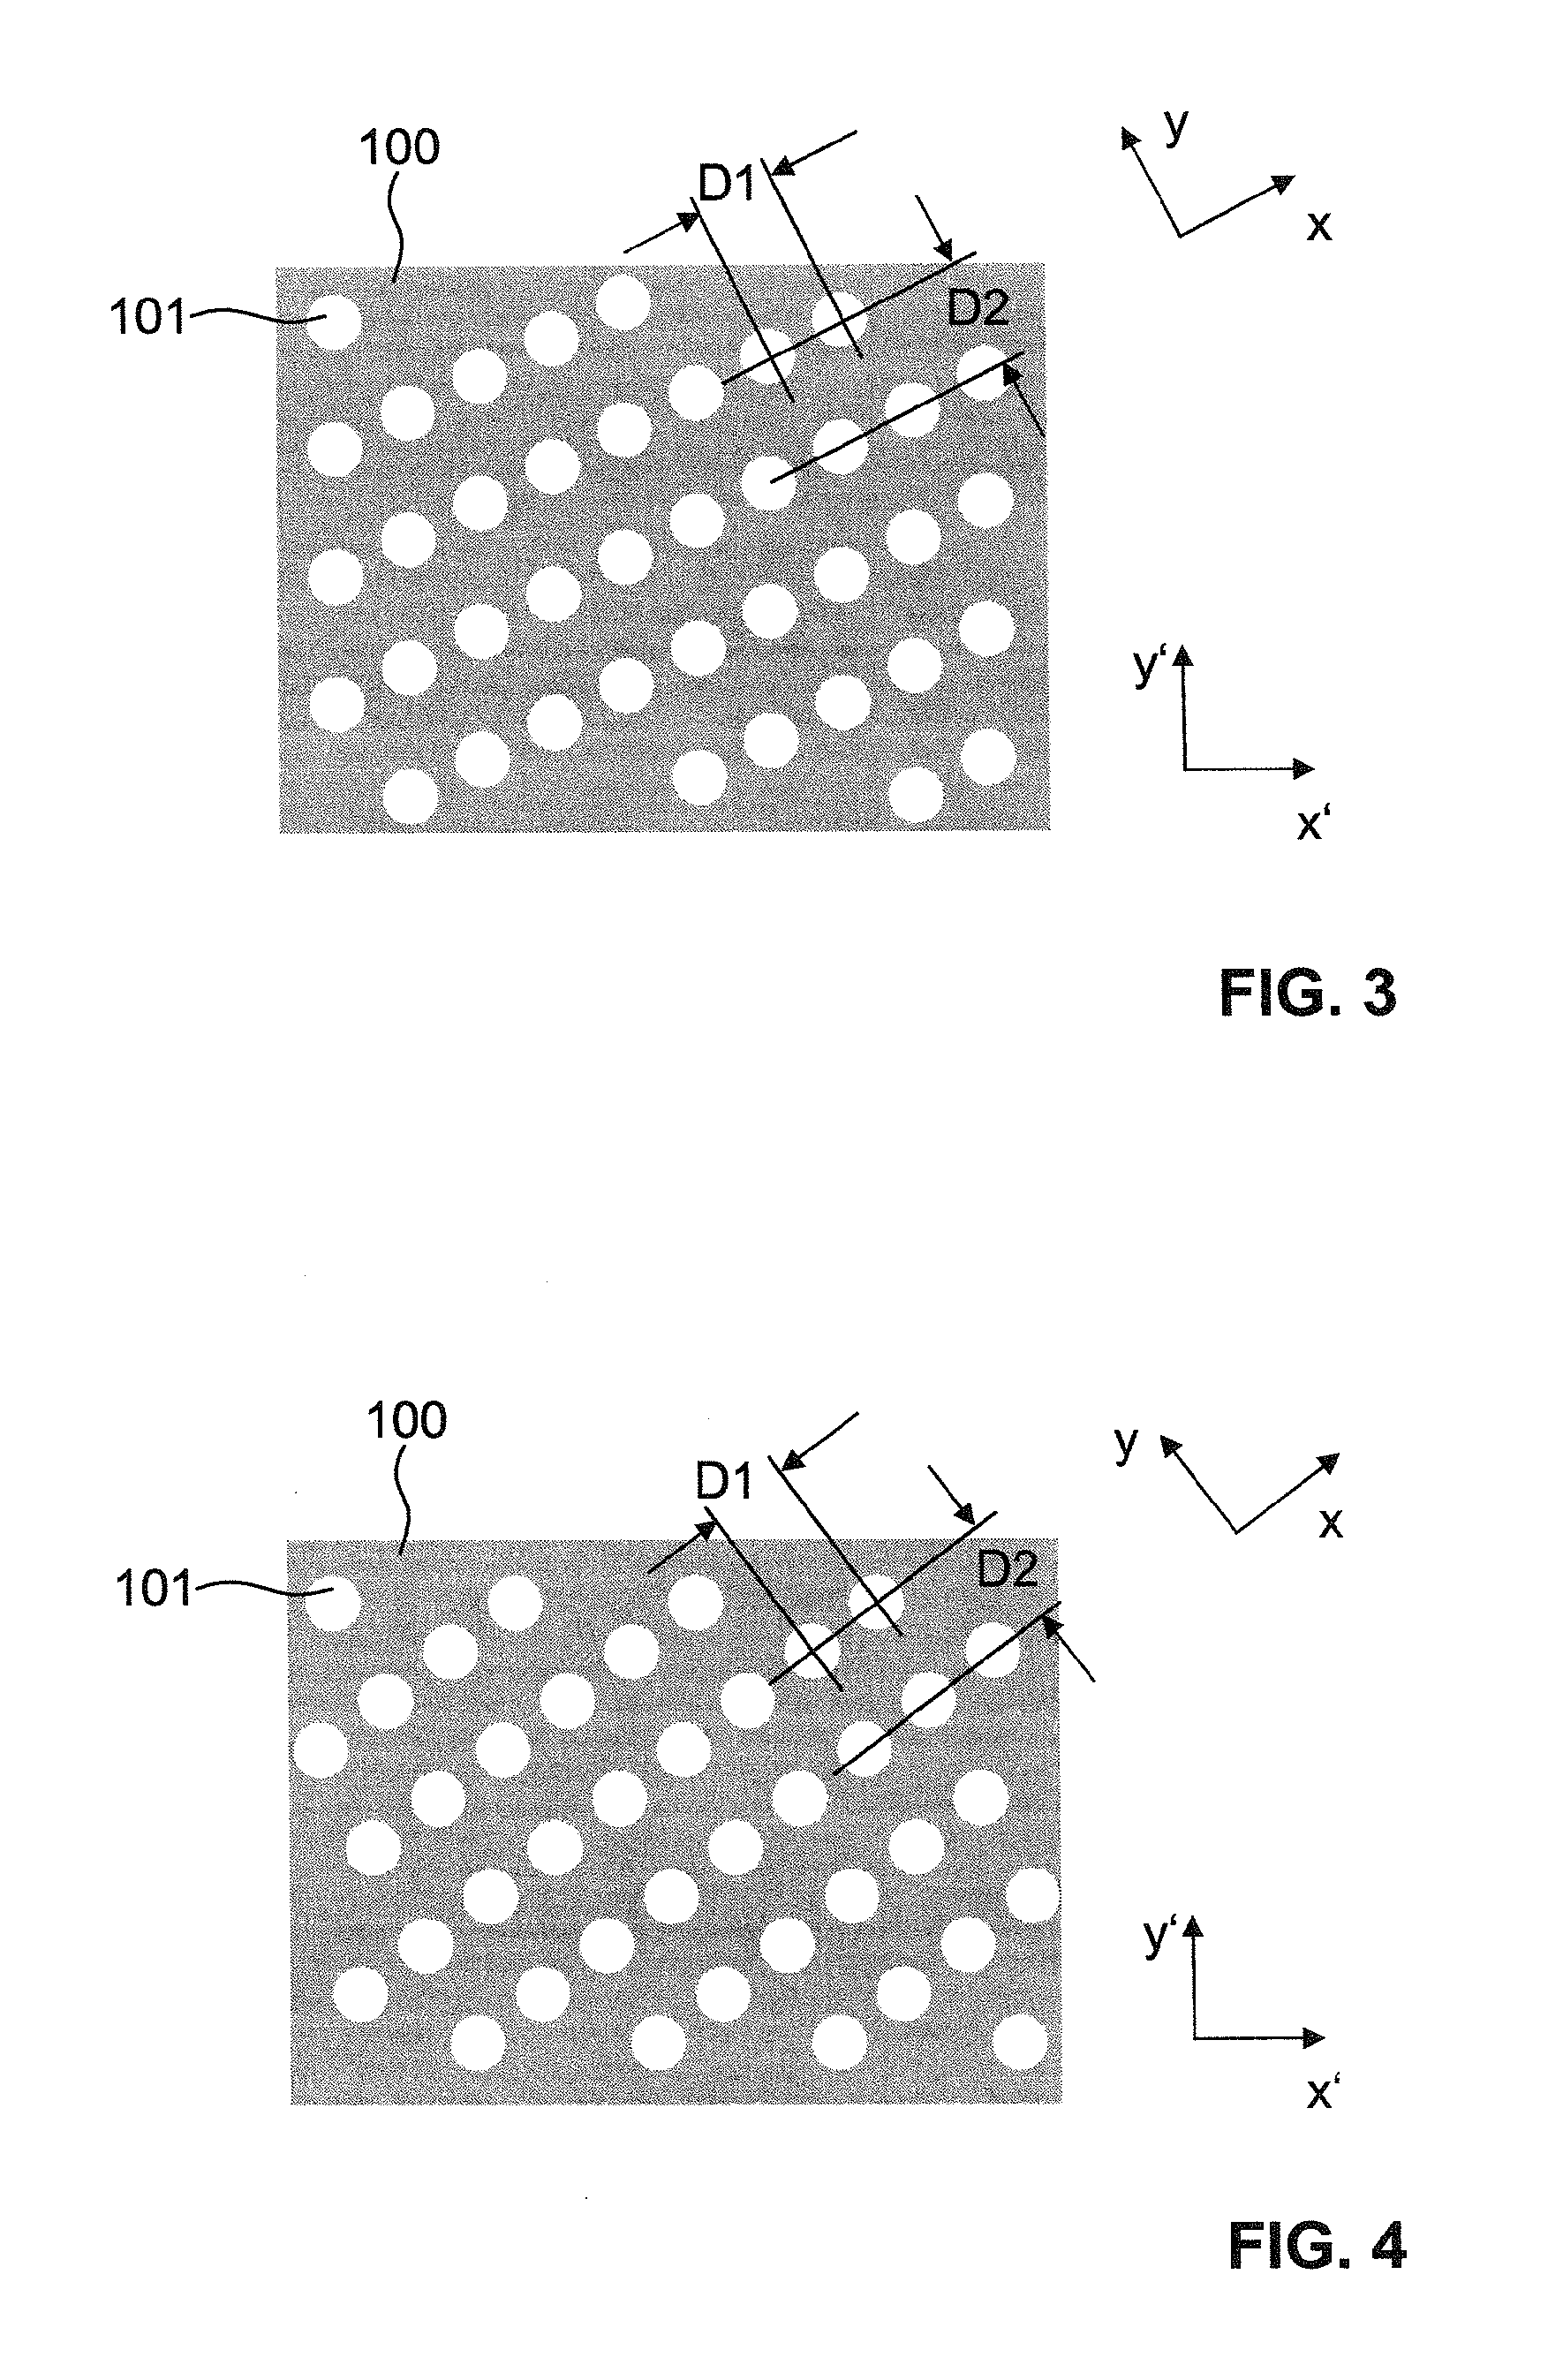 High-density sample support plate for automated sample aliquoting